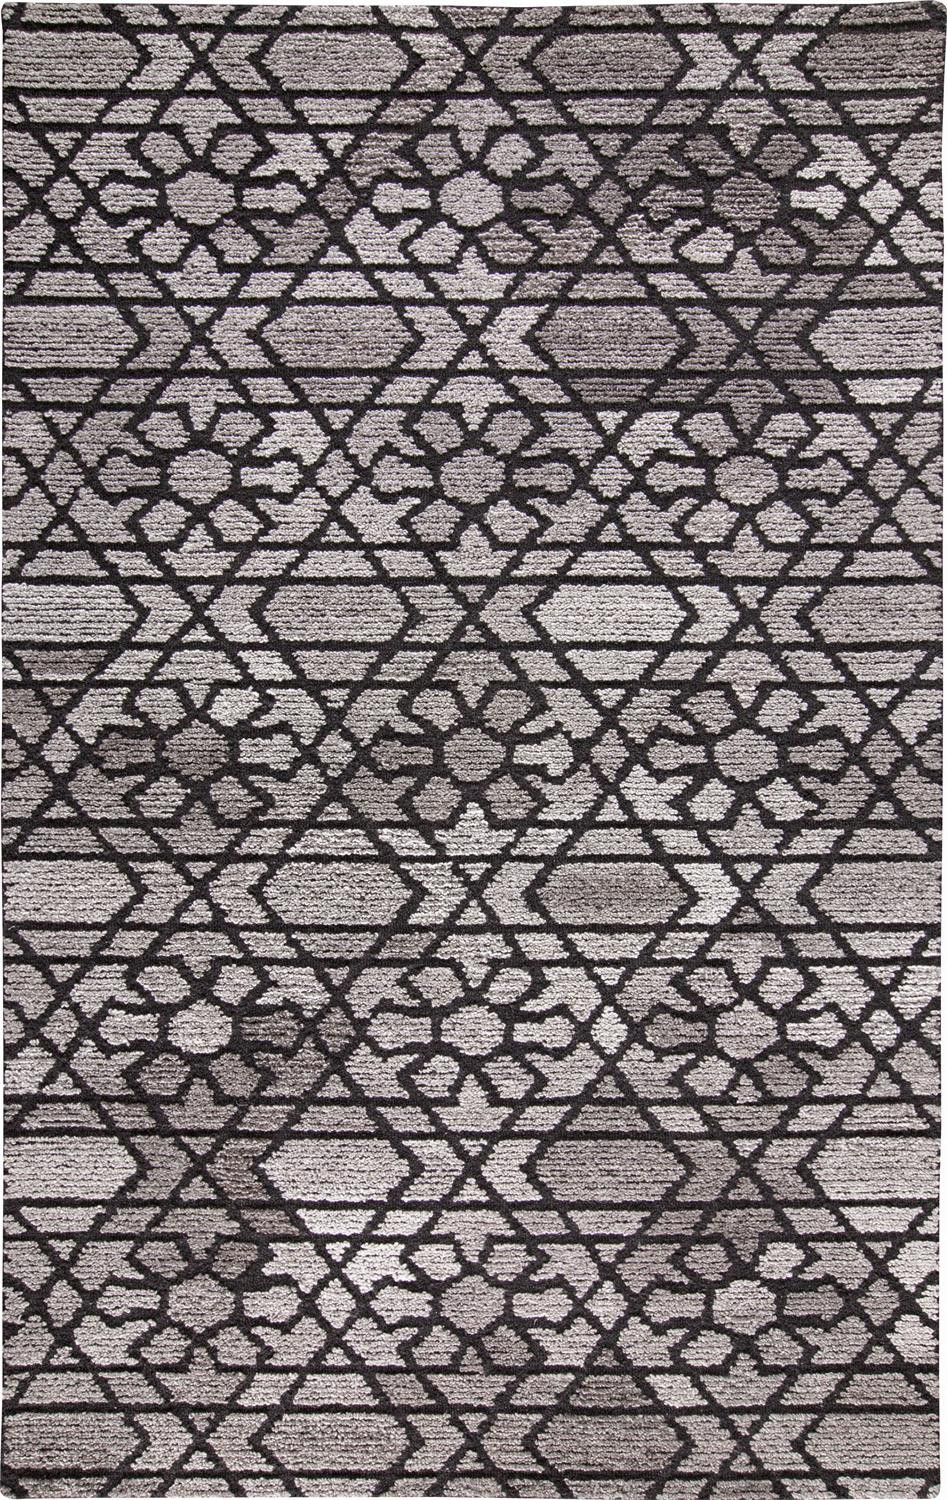 8' X 10' Taupe Black And Gray Wool Paisley Tufted Handmade Area Rug-512006-1